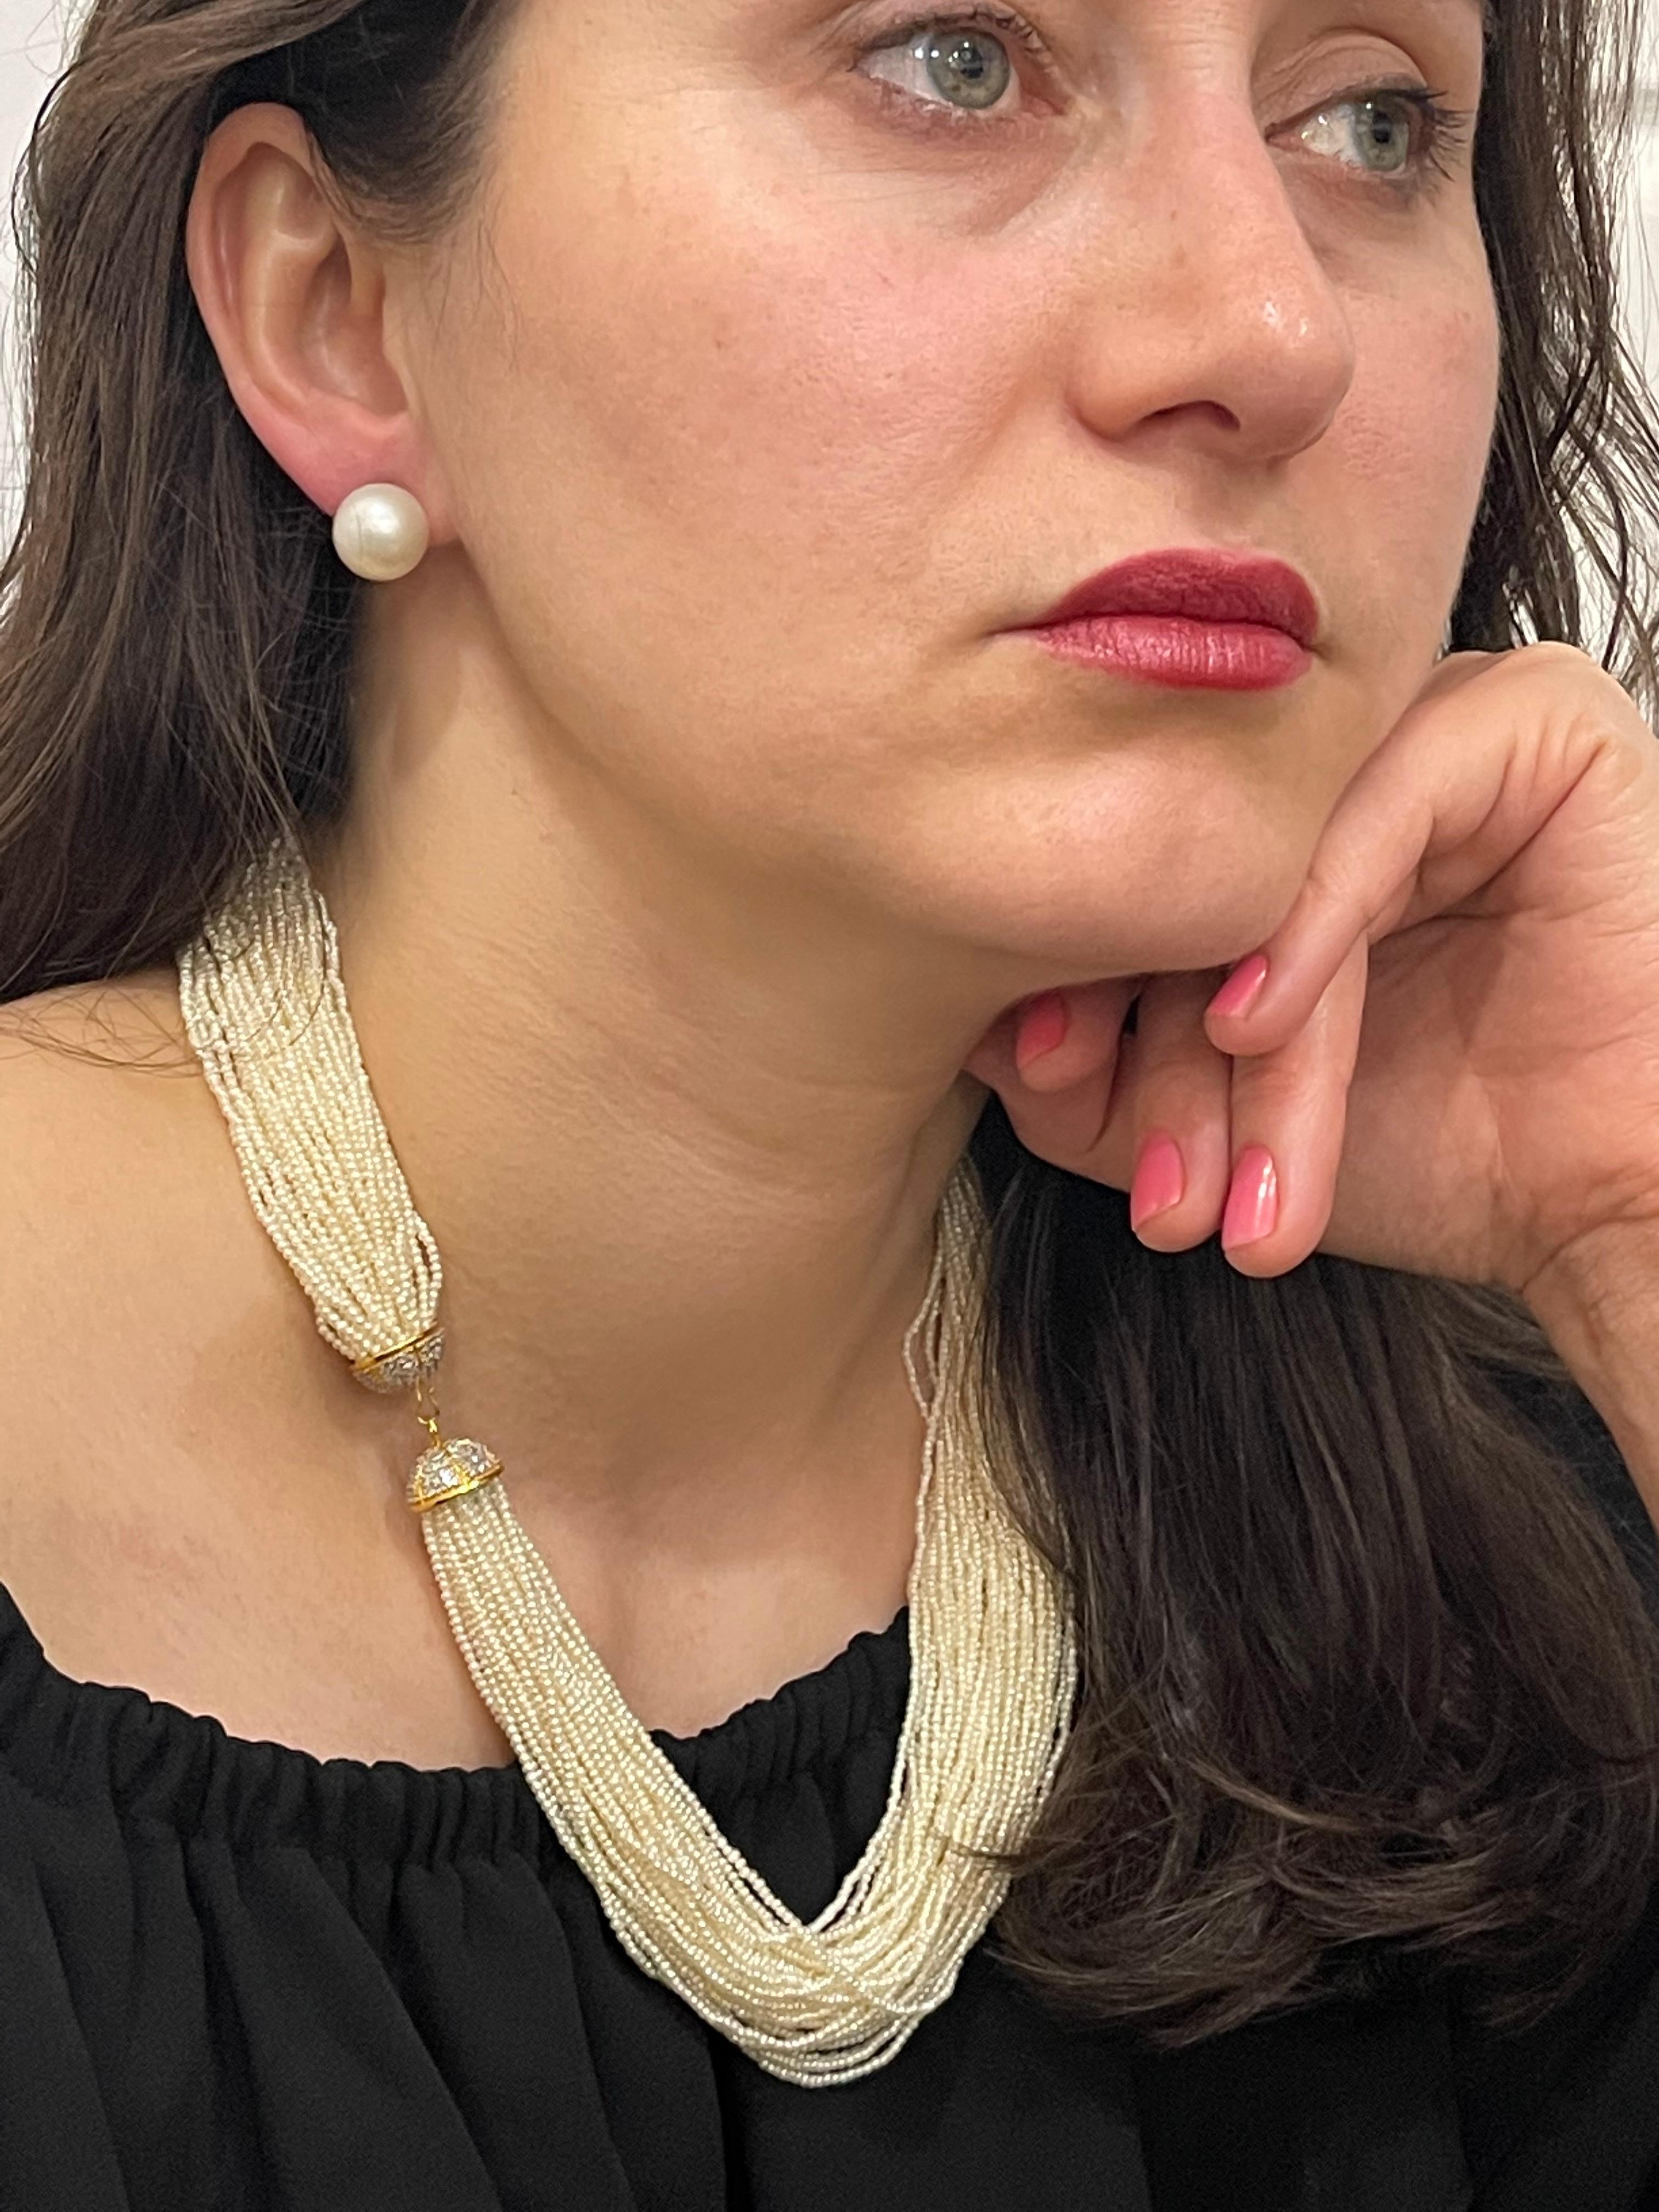 Stunning Necklace  composed of 43  strands of seed pearls ( average 2mm in size ,well matched, of cream body color with faint rose overtones. They are of good quality and luster. The strands are ending in a cap made of diamonds and yellow gold.
This